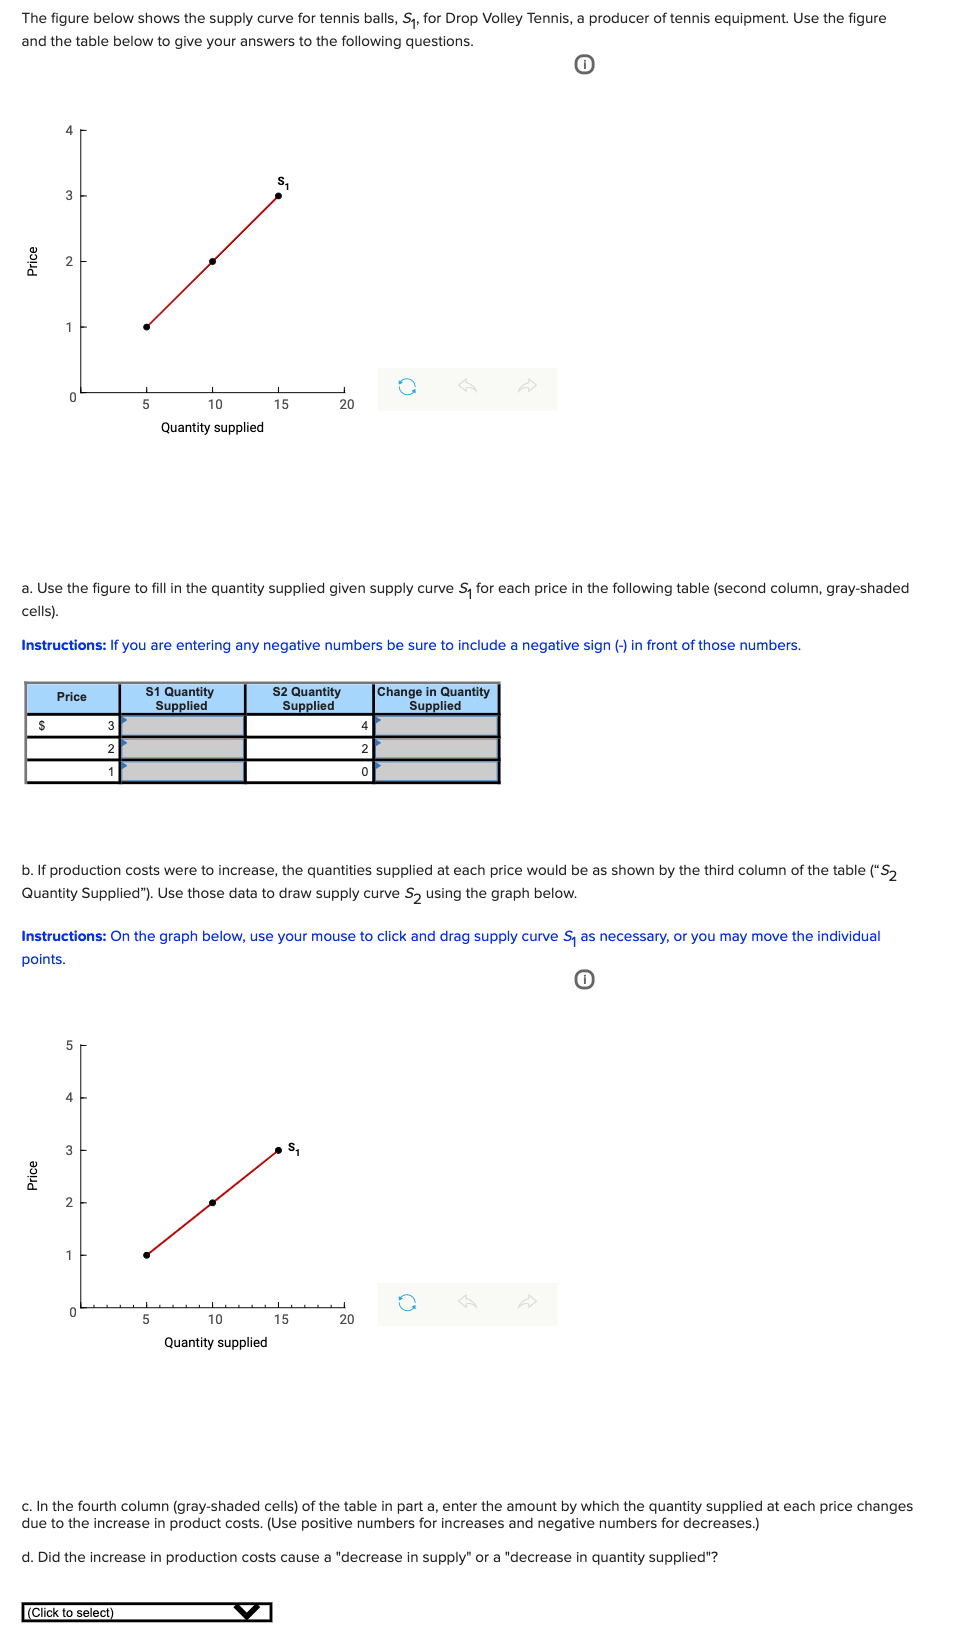 The figure below shows the supply curve for tennis balls, S, for Drop Volley Tennis, a producer of tennis equipment. Use the figure
and the table below to give your answers to the following questions.
4
1
10
15
20
Quantity supplied
a. Use the figure to fill in the quantity supplied given supply curve S, for each price in the following table (second column, gray-shaded
cells).
Instructions: If you are entering any negative numbers be sure to include a negative sign (-) in front of those numbers.
S1 Quantity
Supplied
S2 Quantity
Supplied
Change in Quantity
Supplied
Price
$
3
4
2
1
b. If production costs were to increase, the quantities supplied at each price would be as shown by the third column of the table ("S,
Quantity Supplied"). Use those data to draw supply curve S, using the graph below.
Instructions: On the graph below, use your mouse to click and drag supply curve S, as necessary, or you may move the individual
points.
5
4
3
s,
1
5
10
15
20
Quantity supplied
c. In the fourth column (gray-shaded cells) of the table in part a, enter the amount by which the quantity supplied at each price changes
due to the increase in product costs. (Use positive numbers for increases and negative numbers for decreases.)
d. Did the increase in production costs cause a "decrease in supply" or a "decrease in quantity supplied"?
(Click to select)
Price
Price
